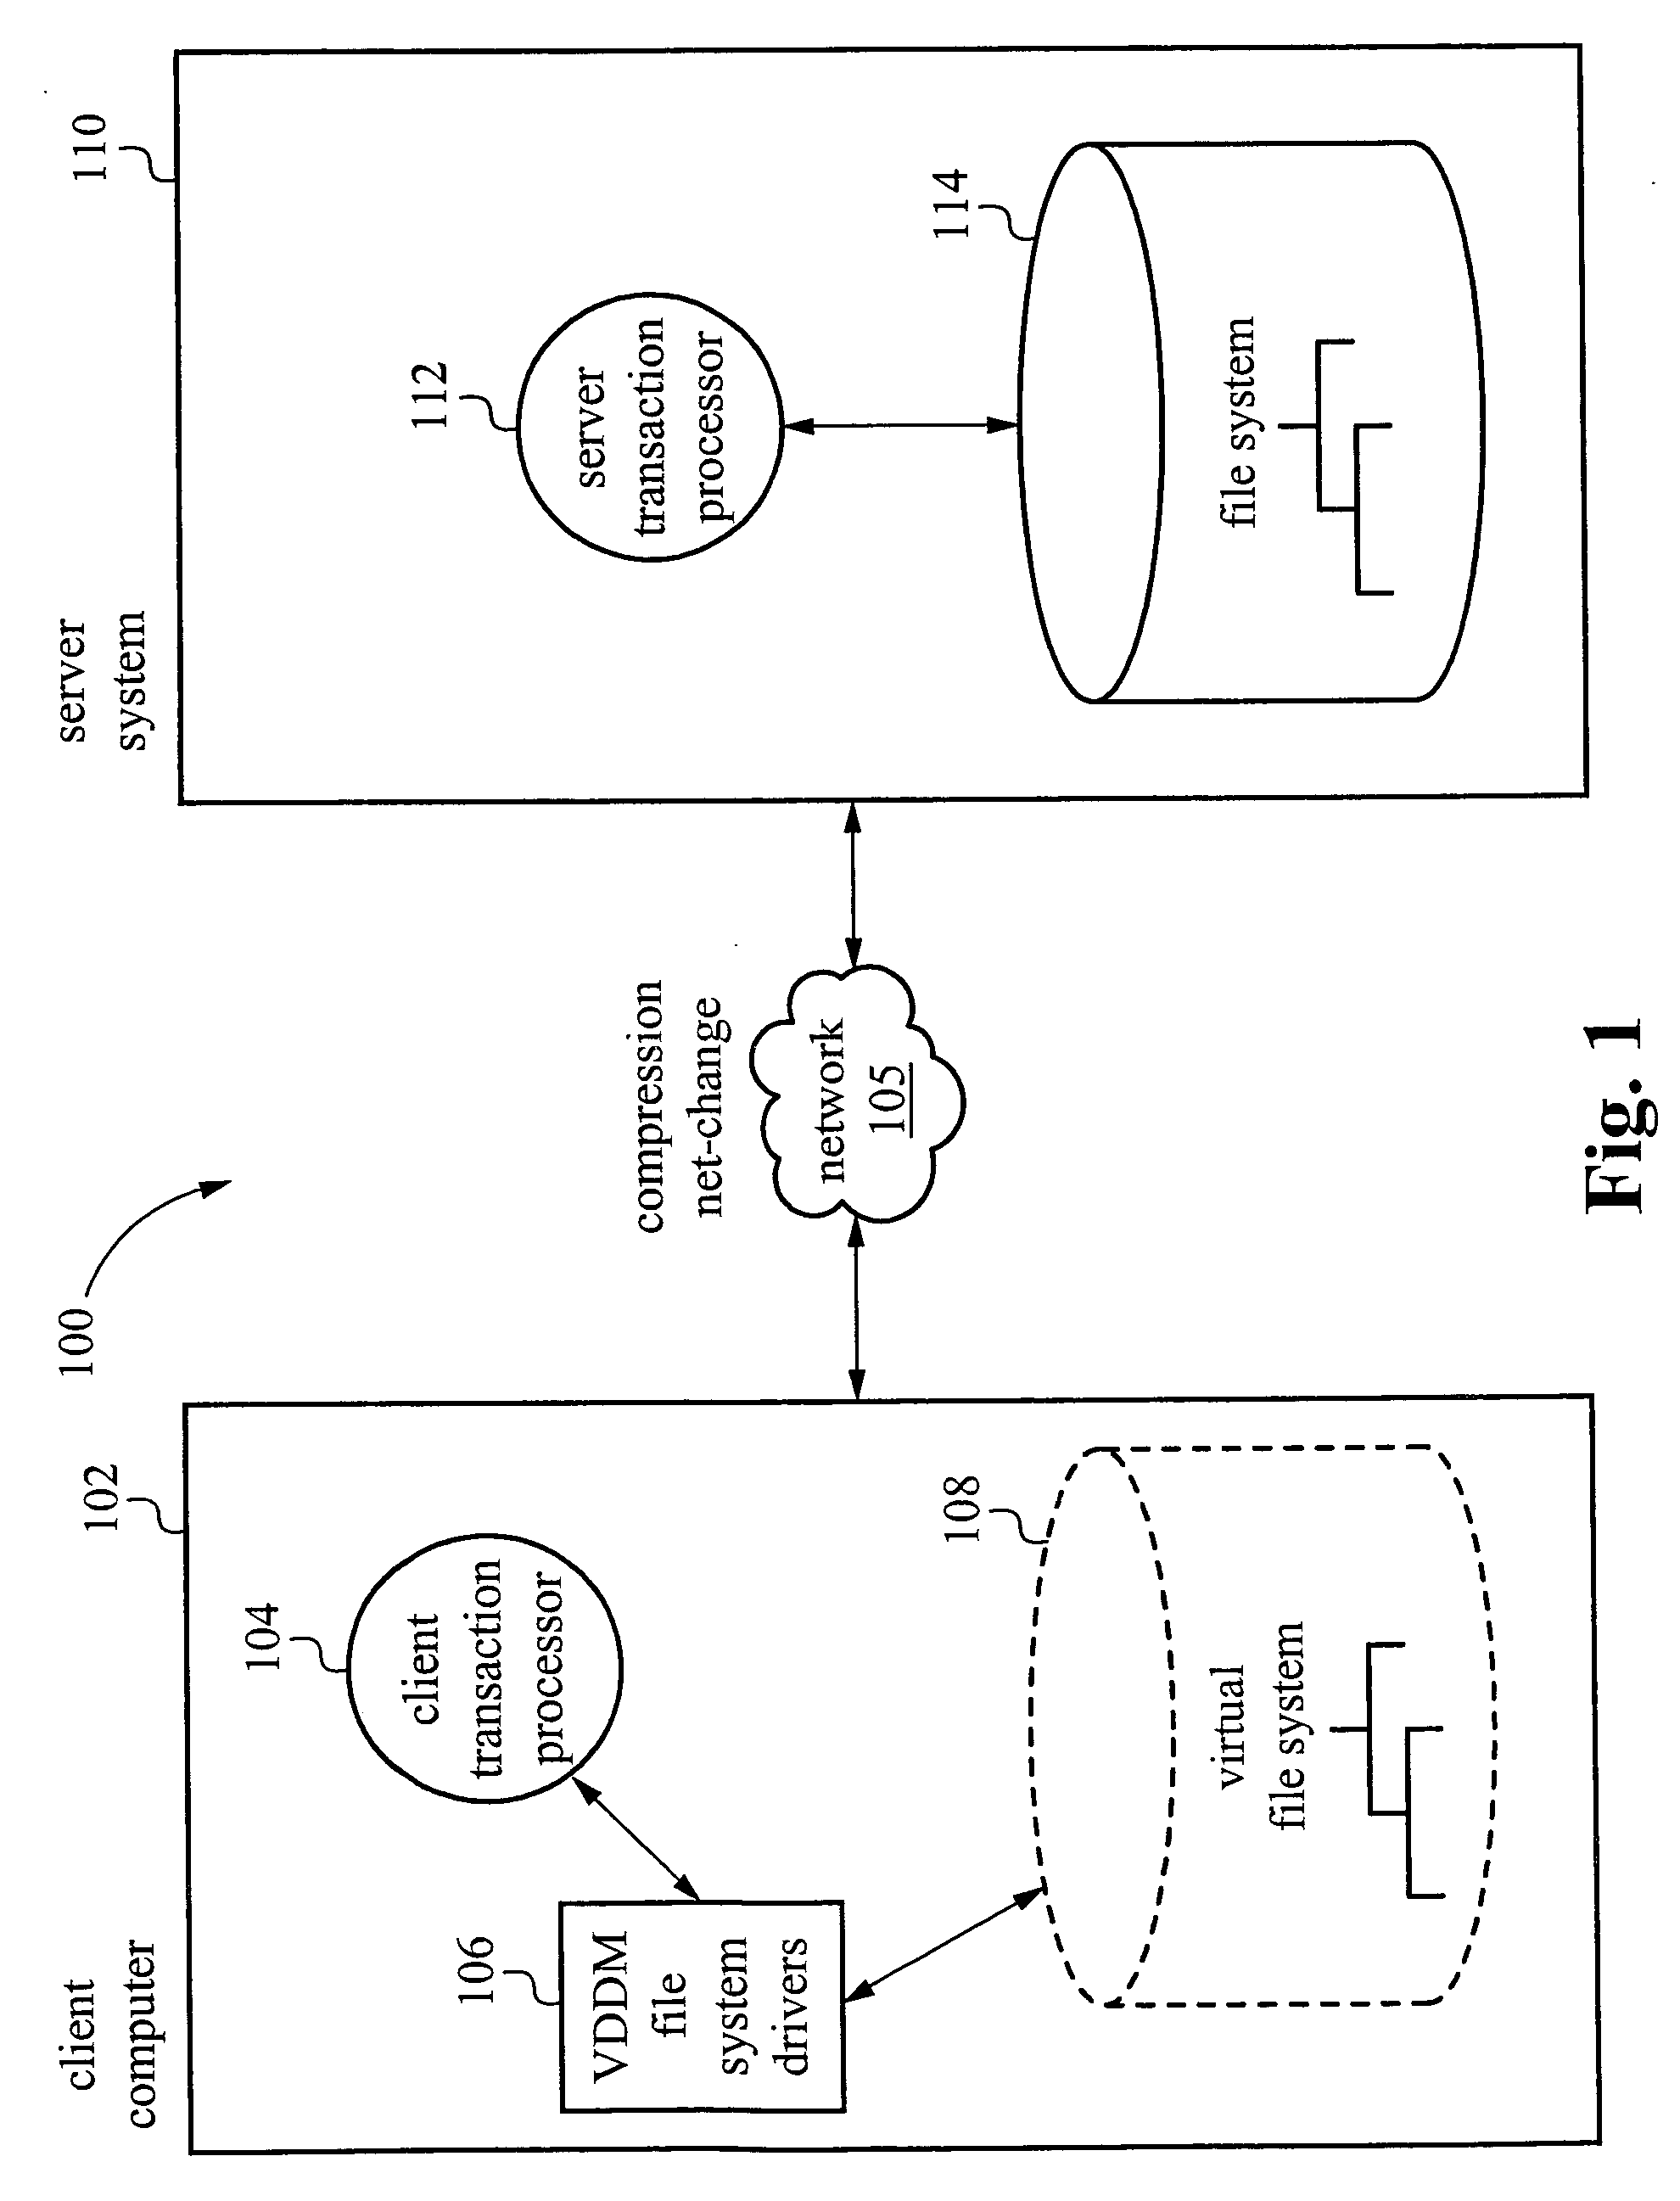 Transaction based virtual file system optimized for high-latency network connections